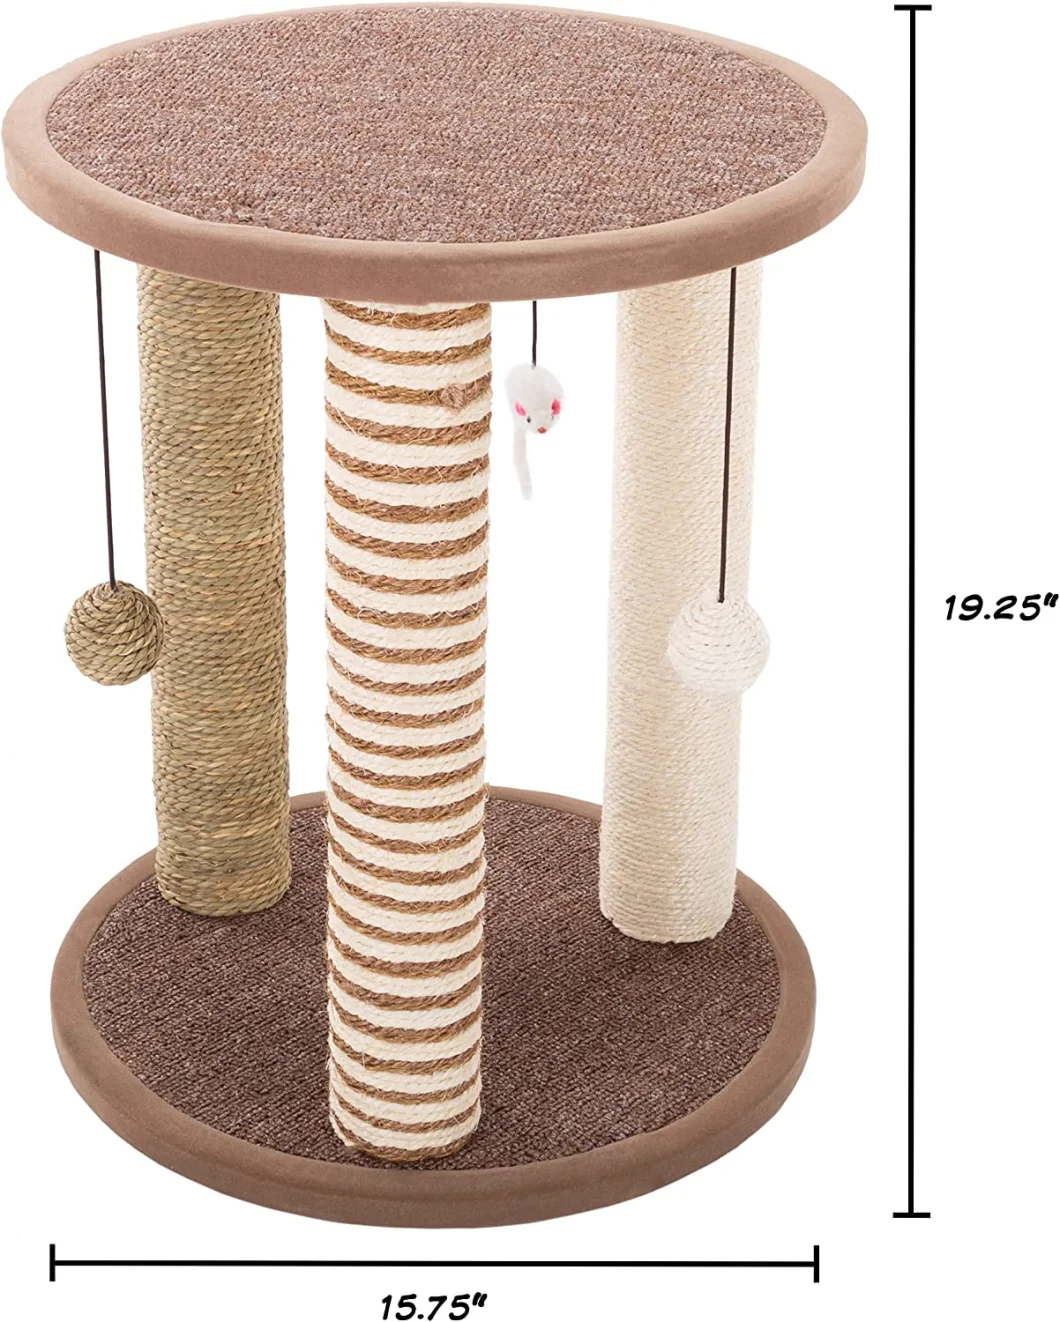 Cat Scratching Post Tower with 3 Scratcher Posts, Carpeted Base Play Area and Perch &ndash; Furniture Scratching Deterrent for Indoor Cats by Petmaker